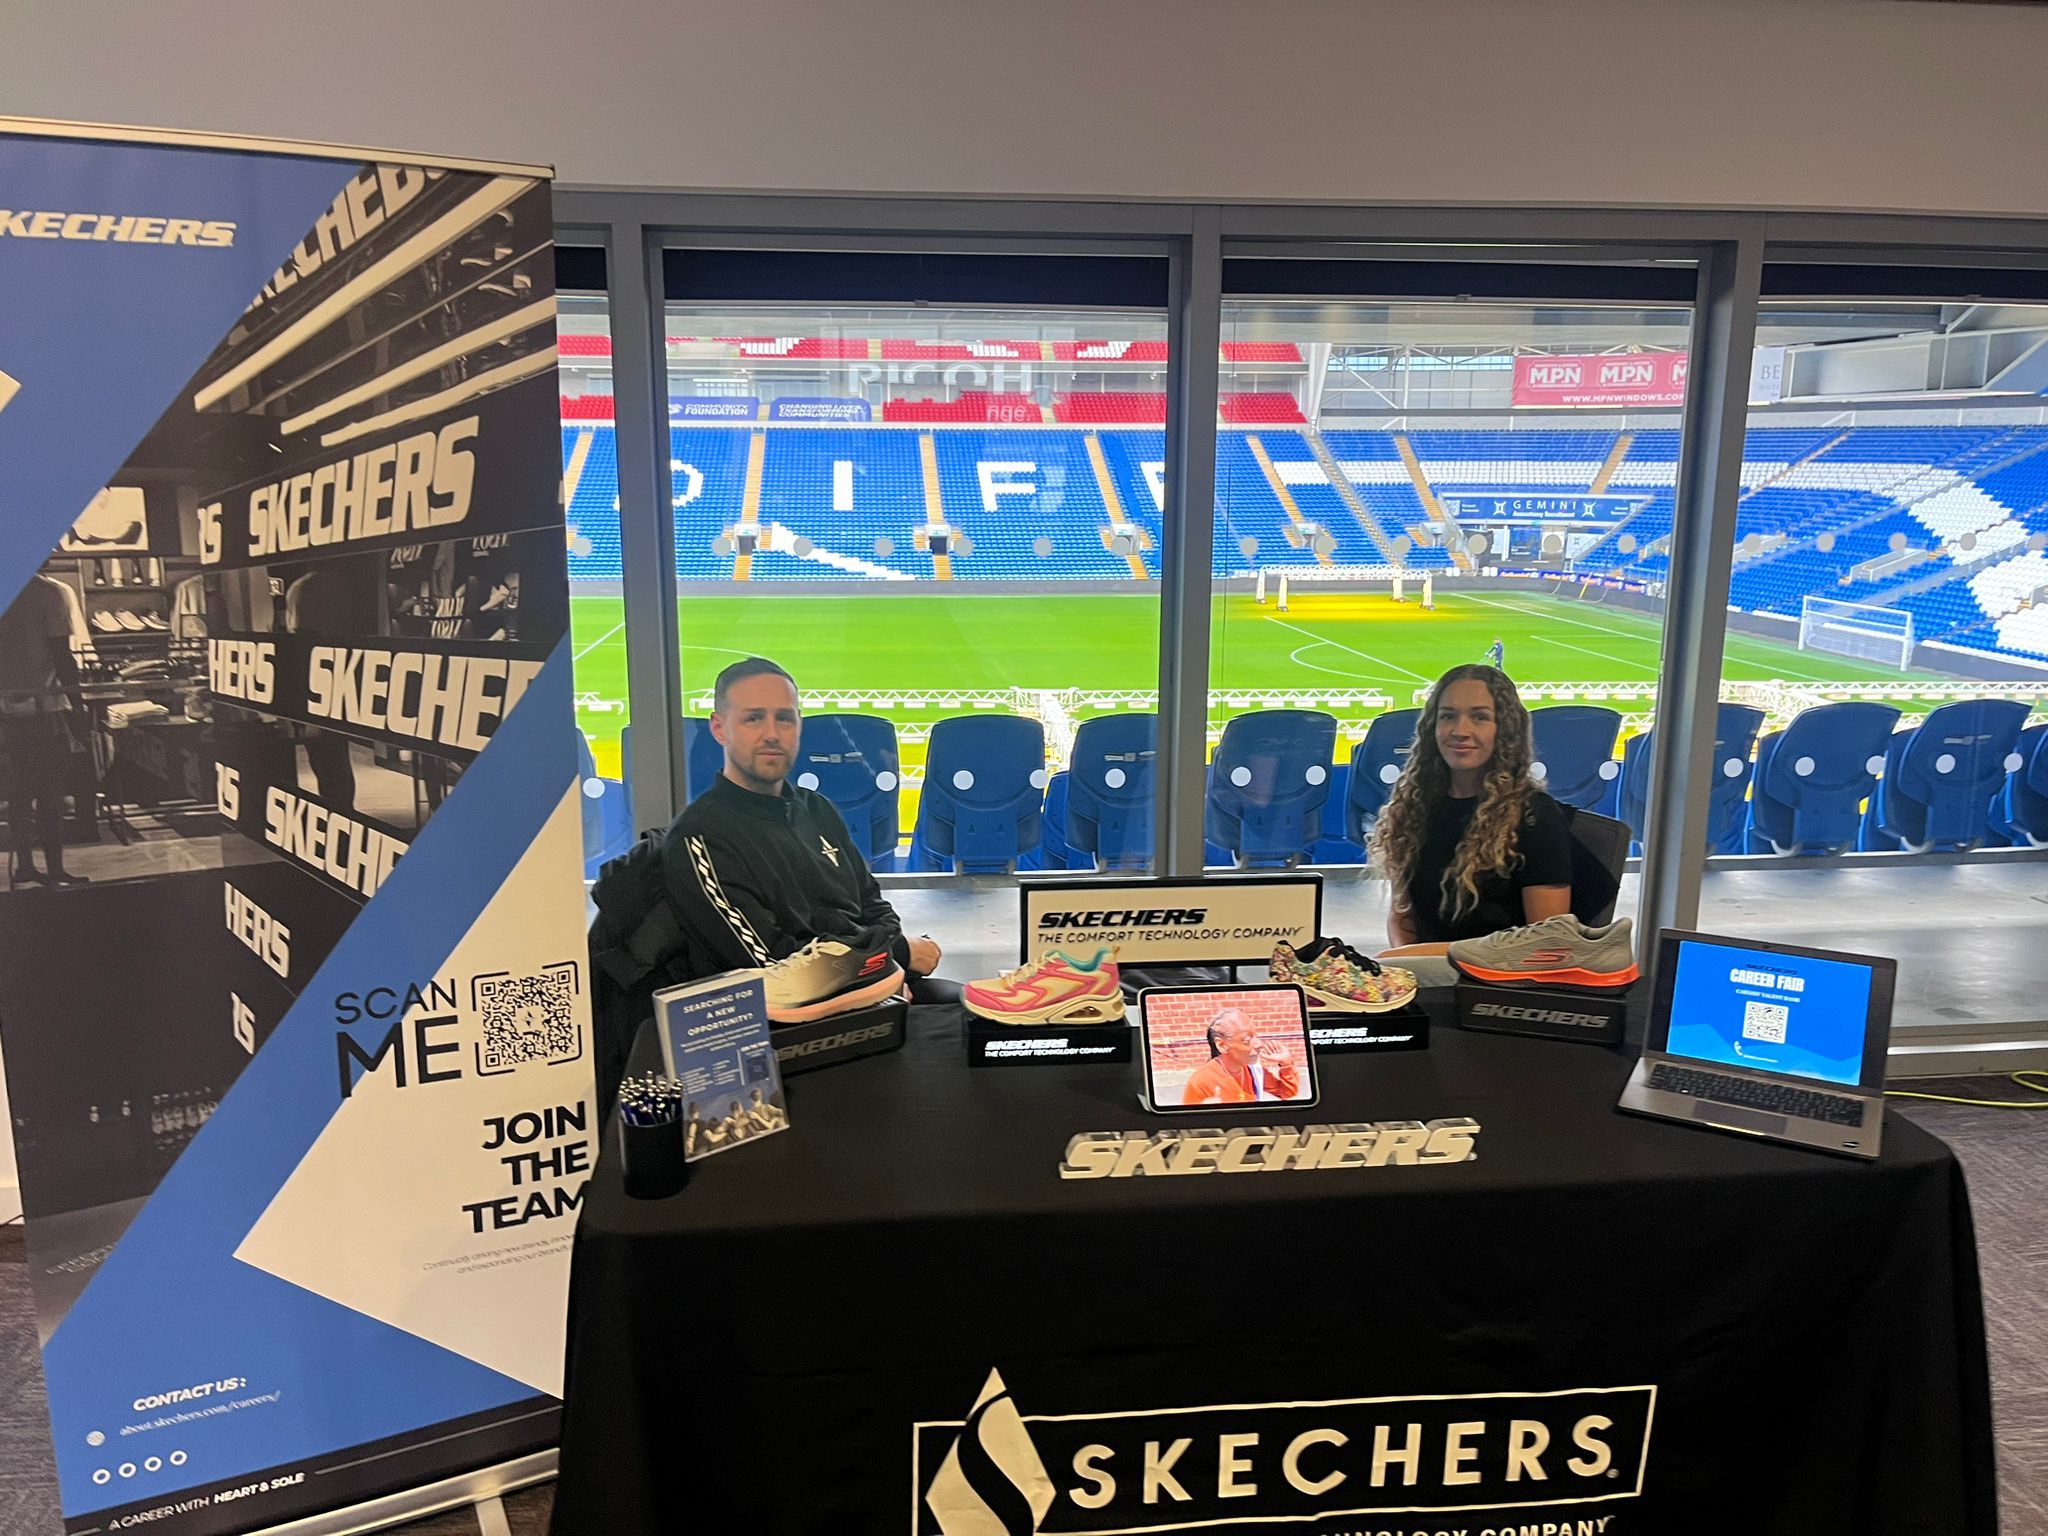 Sketchers at our event in Cardiff